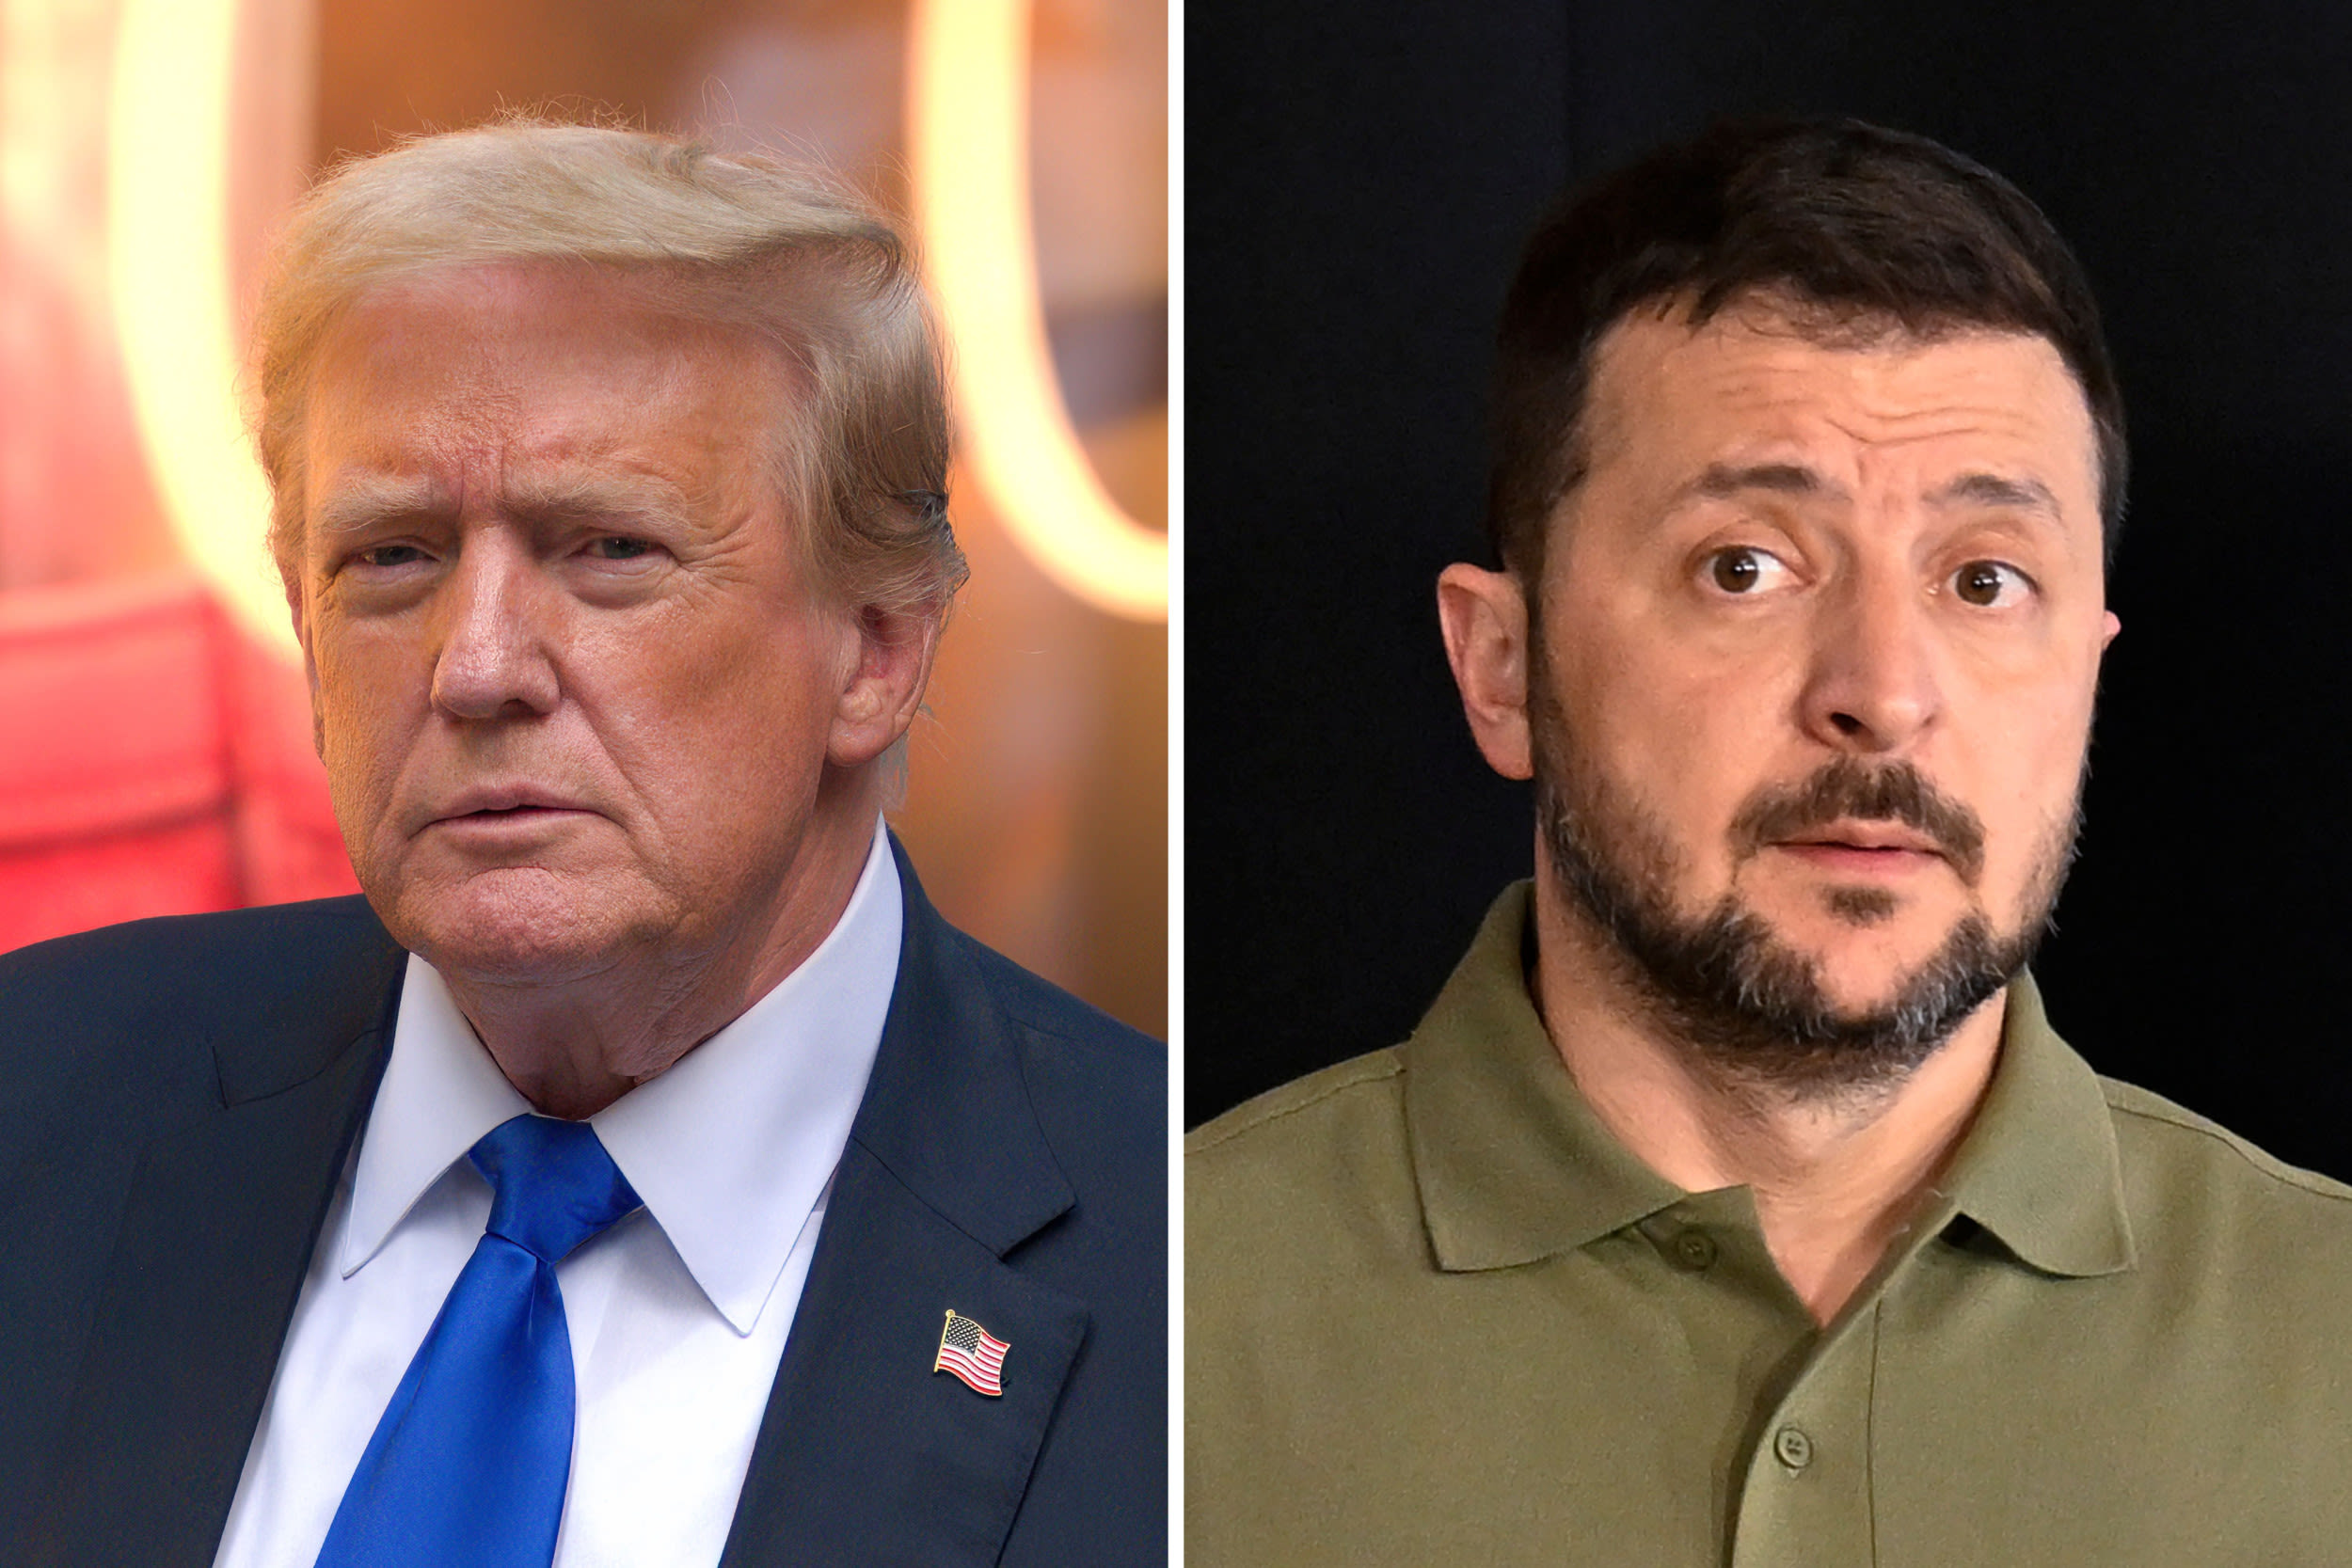 Zelensky warns Trump about becoming "loser president" if reelected